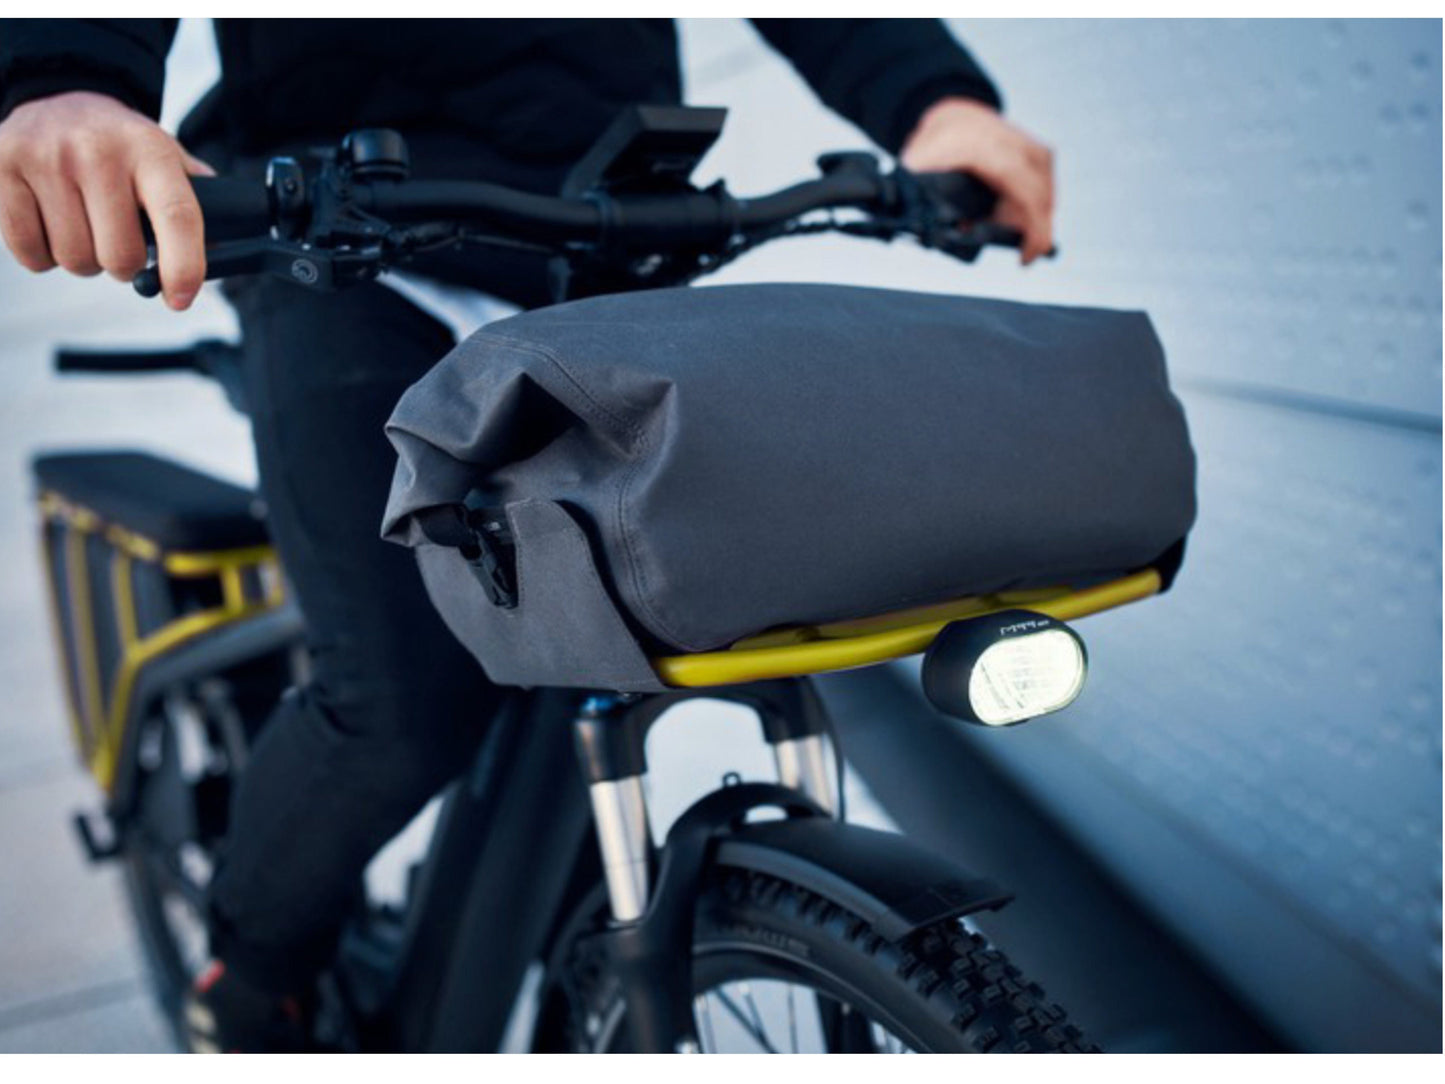 Riese and Muller Multicharger GT Vario HS emtb hardtail close up front carrier bag option headlight